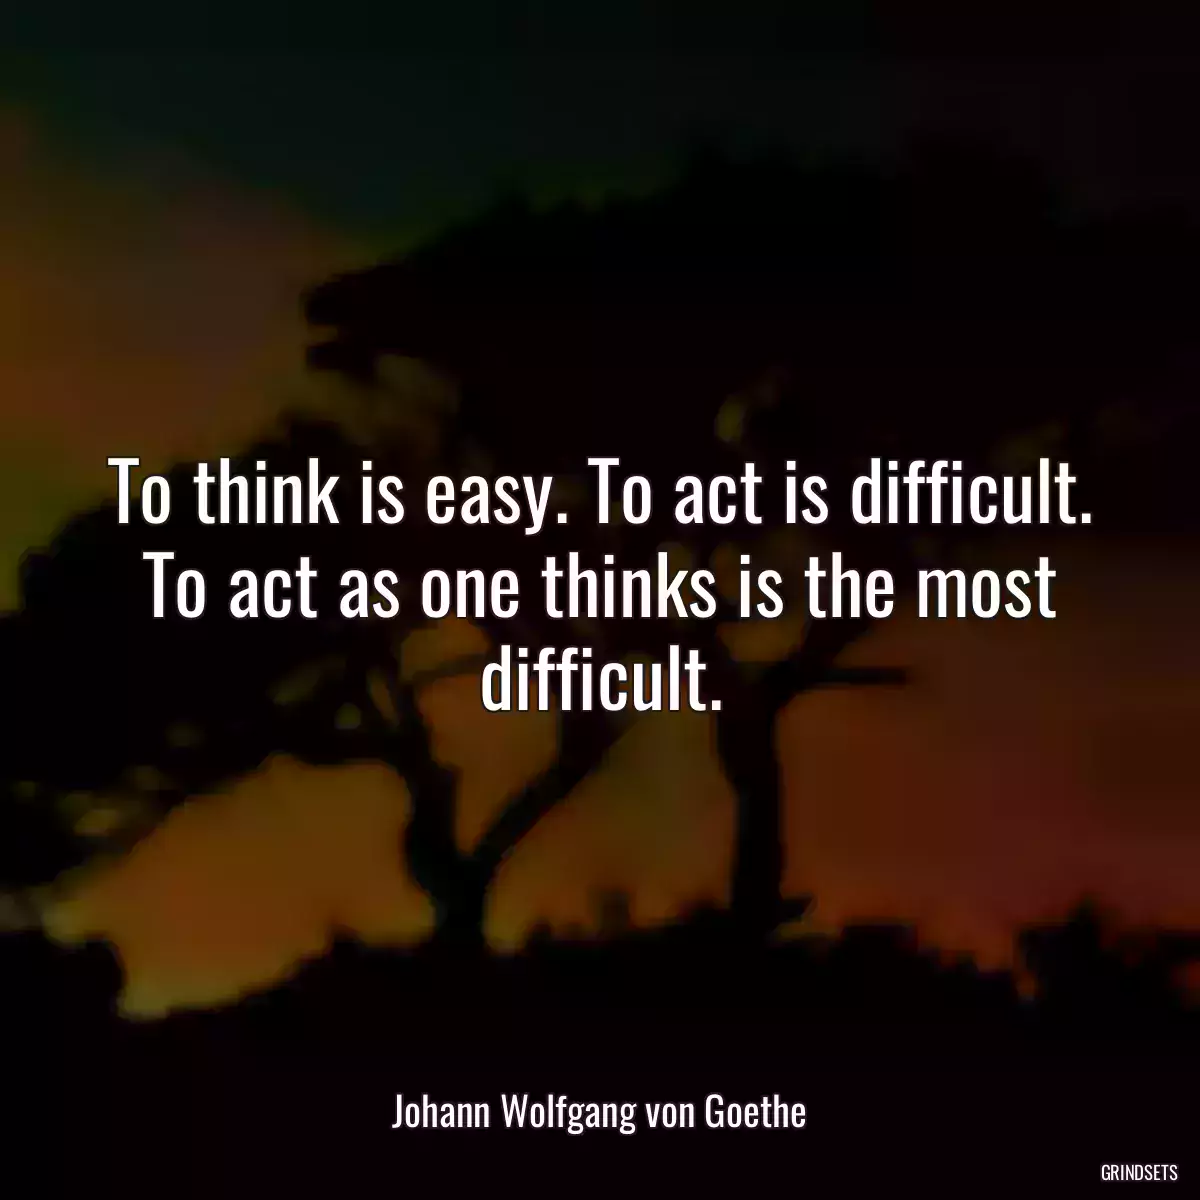 To think is easy. To act is difficult. To act as one thinks is the most difficult.